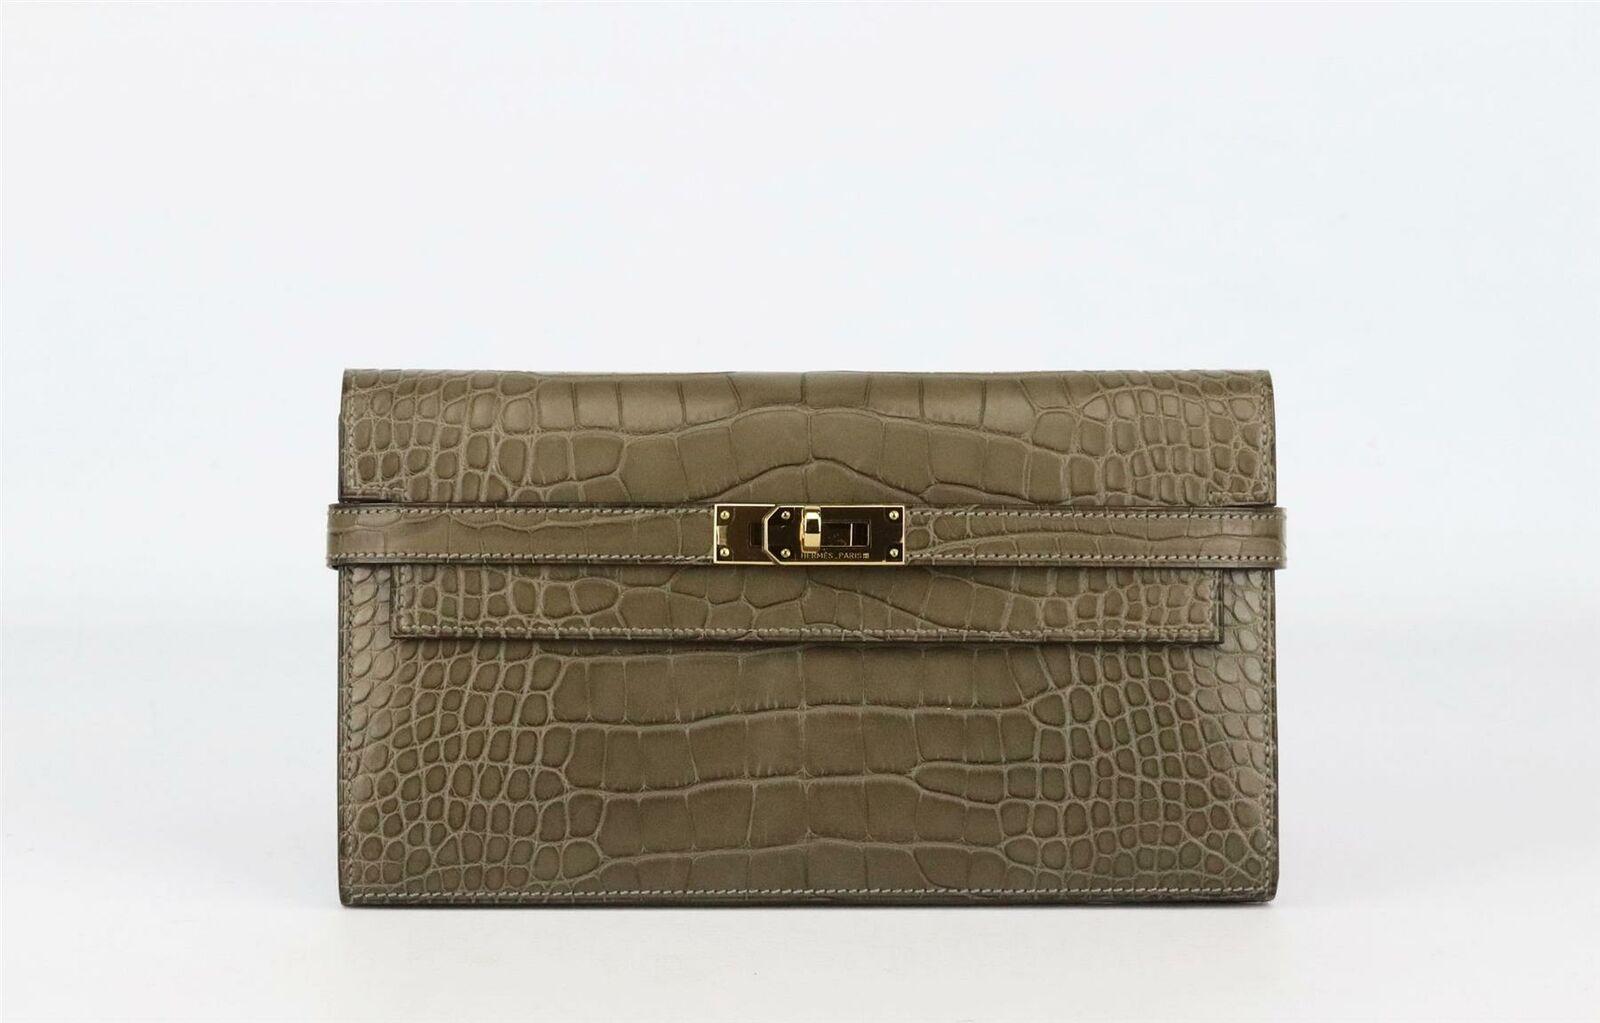 Made in France, this beautiful 2016 Hermès ‘Kelly Long’ wallet or clutch has been made from beautiful matte Alligator Mississippiensis in brown and soft leather interior, it is decorated with the Kelly closure in gold hardware on the front and